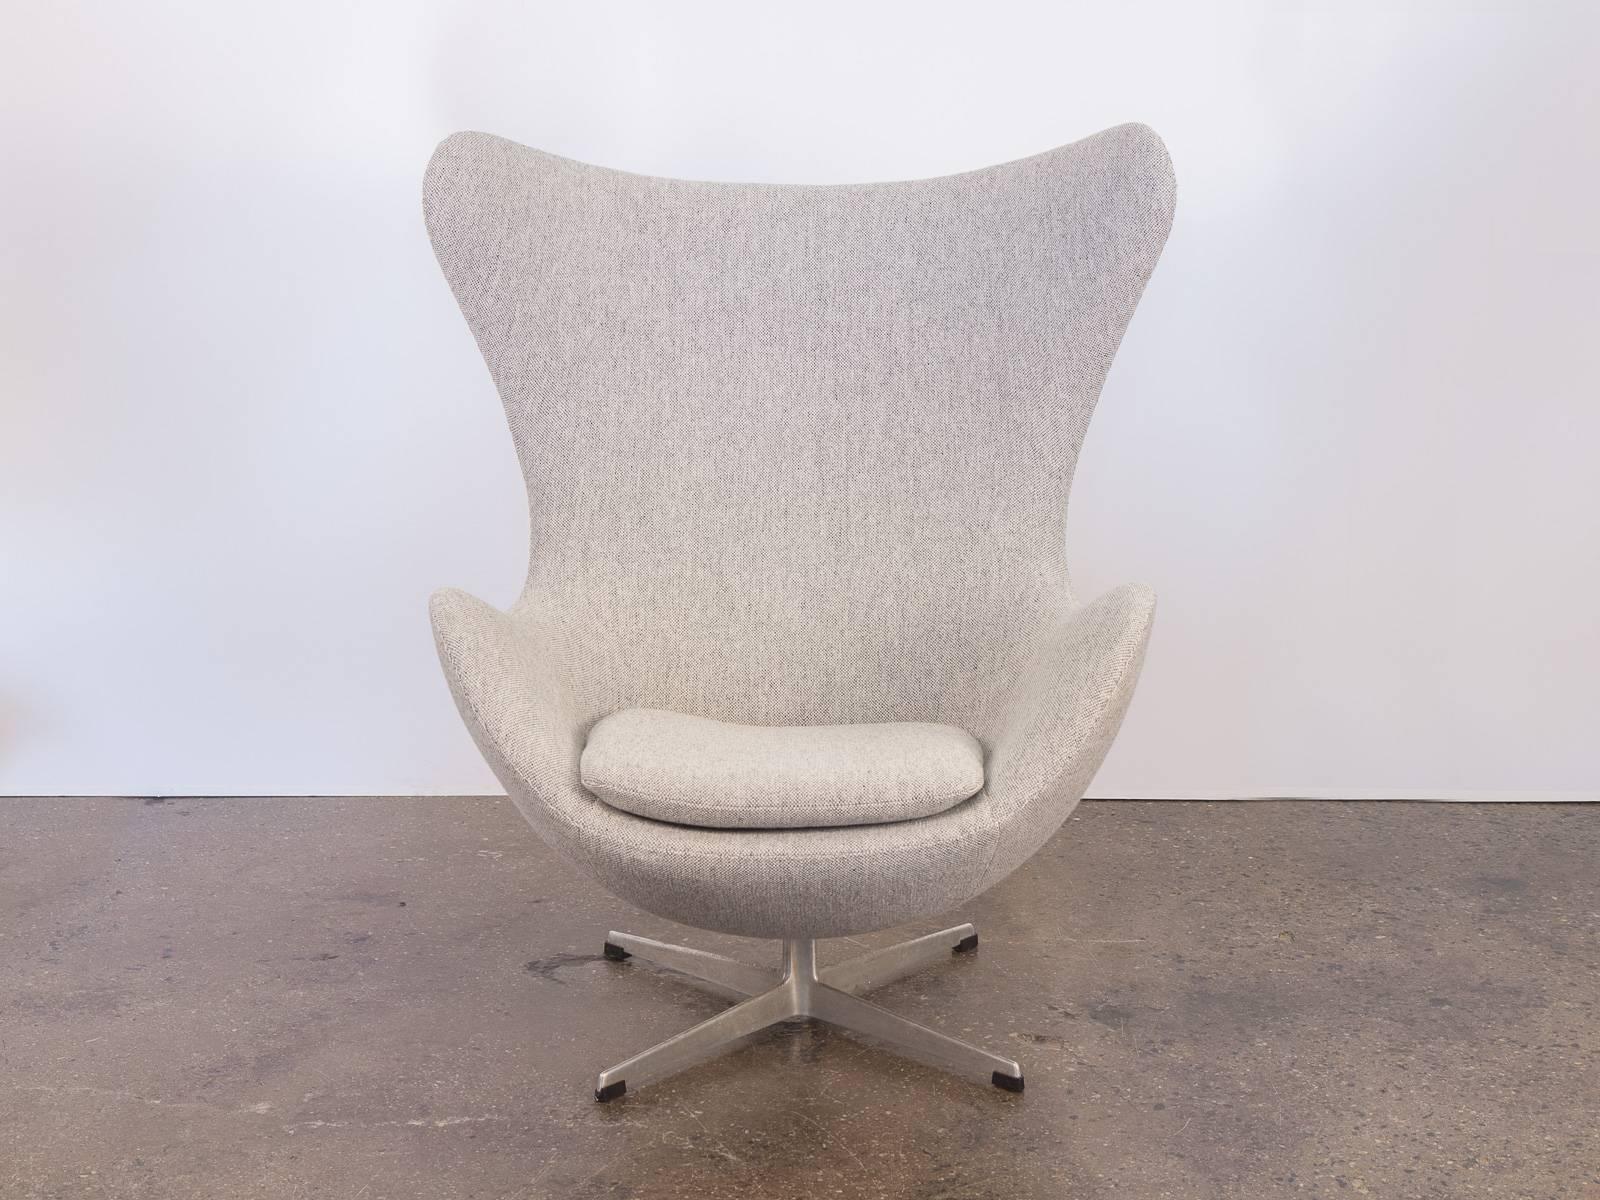 The iconic Egg chair and matching footstool designed by Arne Jacobsen in 1958. Our chair dates to the 1960s and has been meticulously upholstered in a textured, pale gray Hallingdal by Kvadrat wool. Supremely comfortable. Swiveling four-star base on